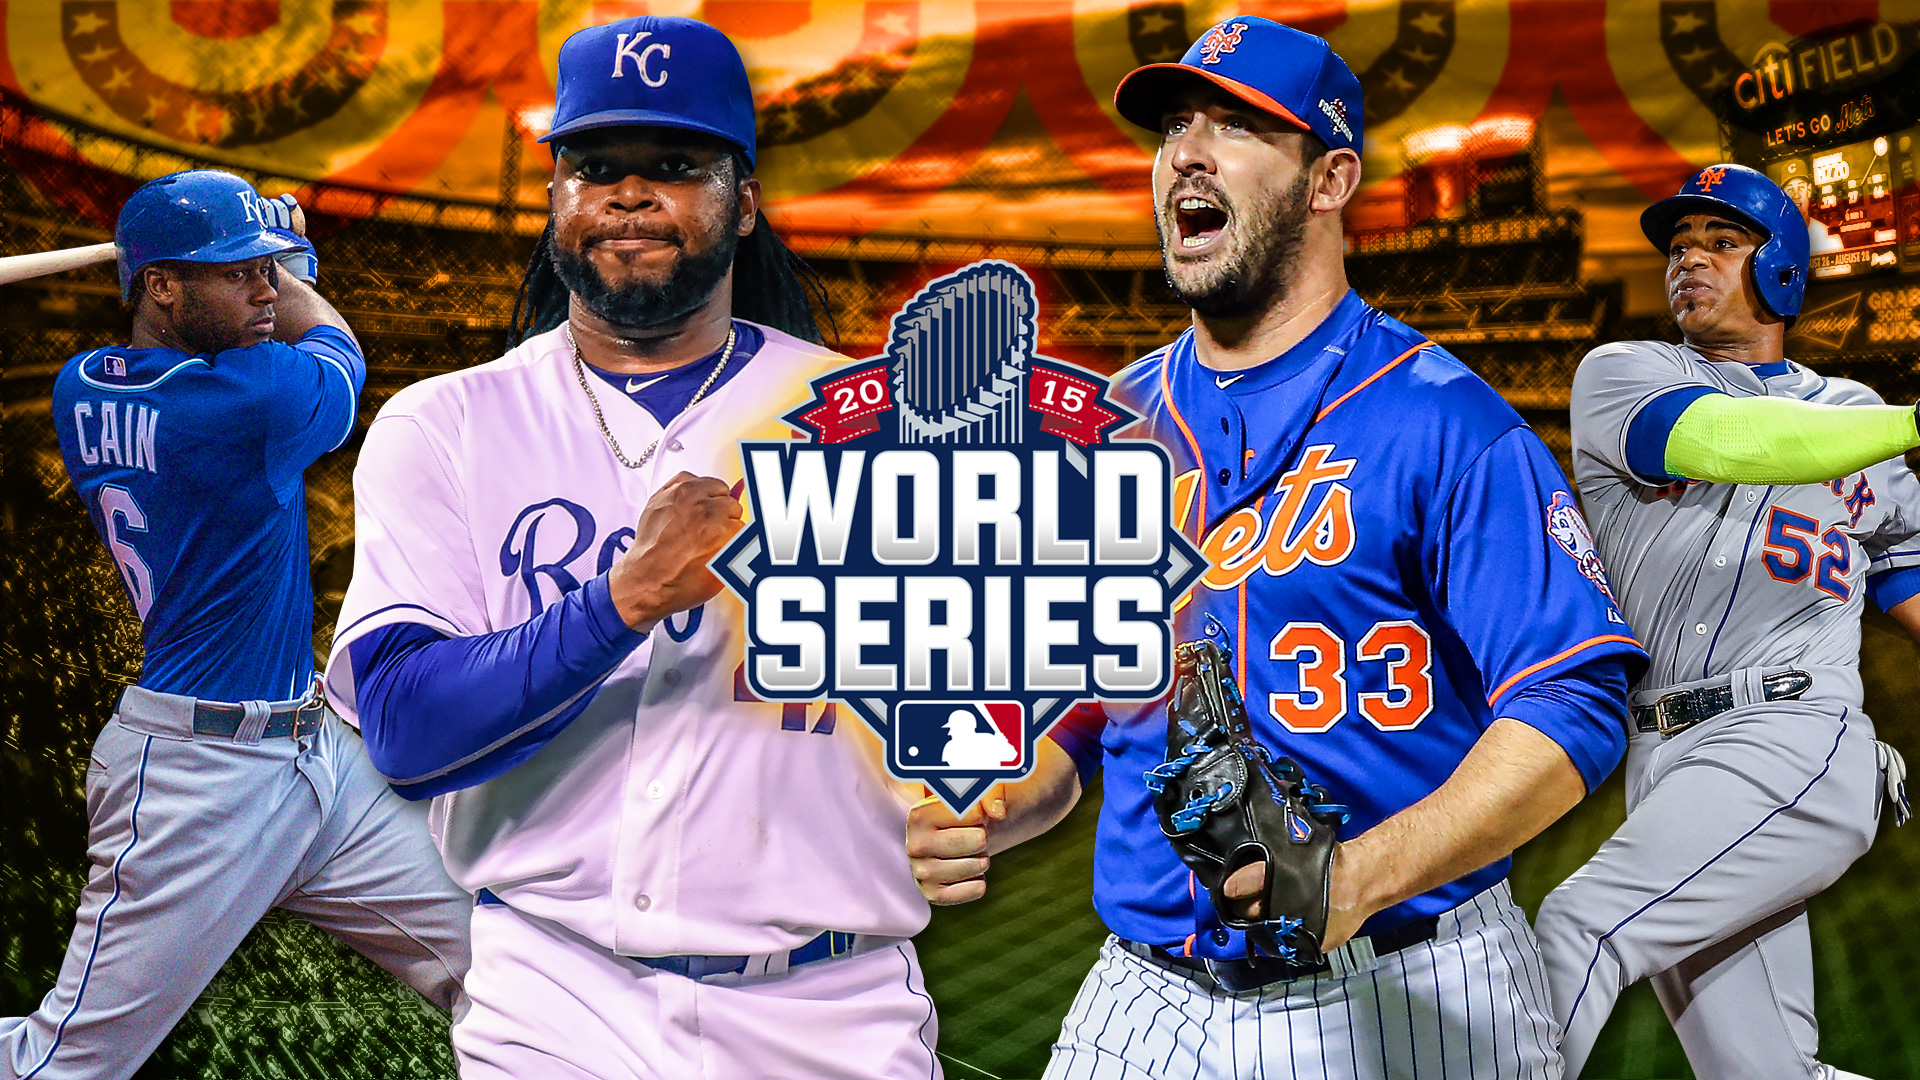 World Series 2015 TV schedule for Royals vs. Mets MLB Sporting News